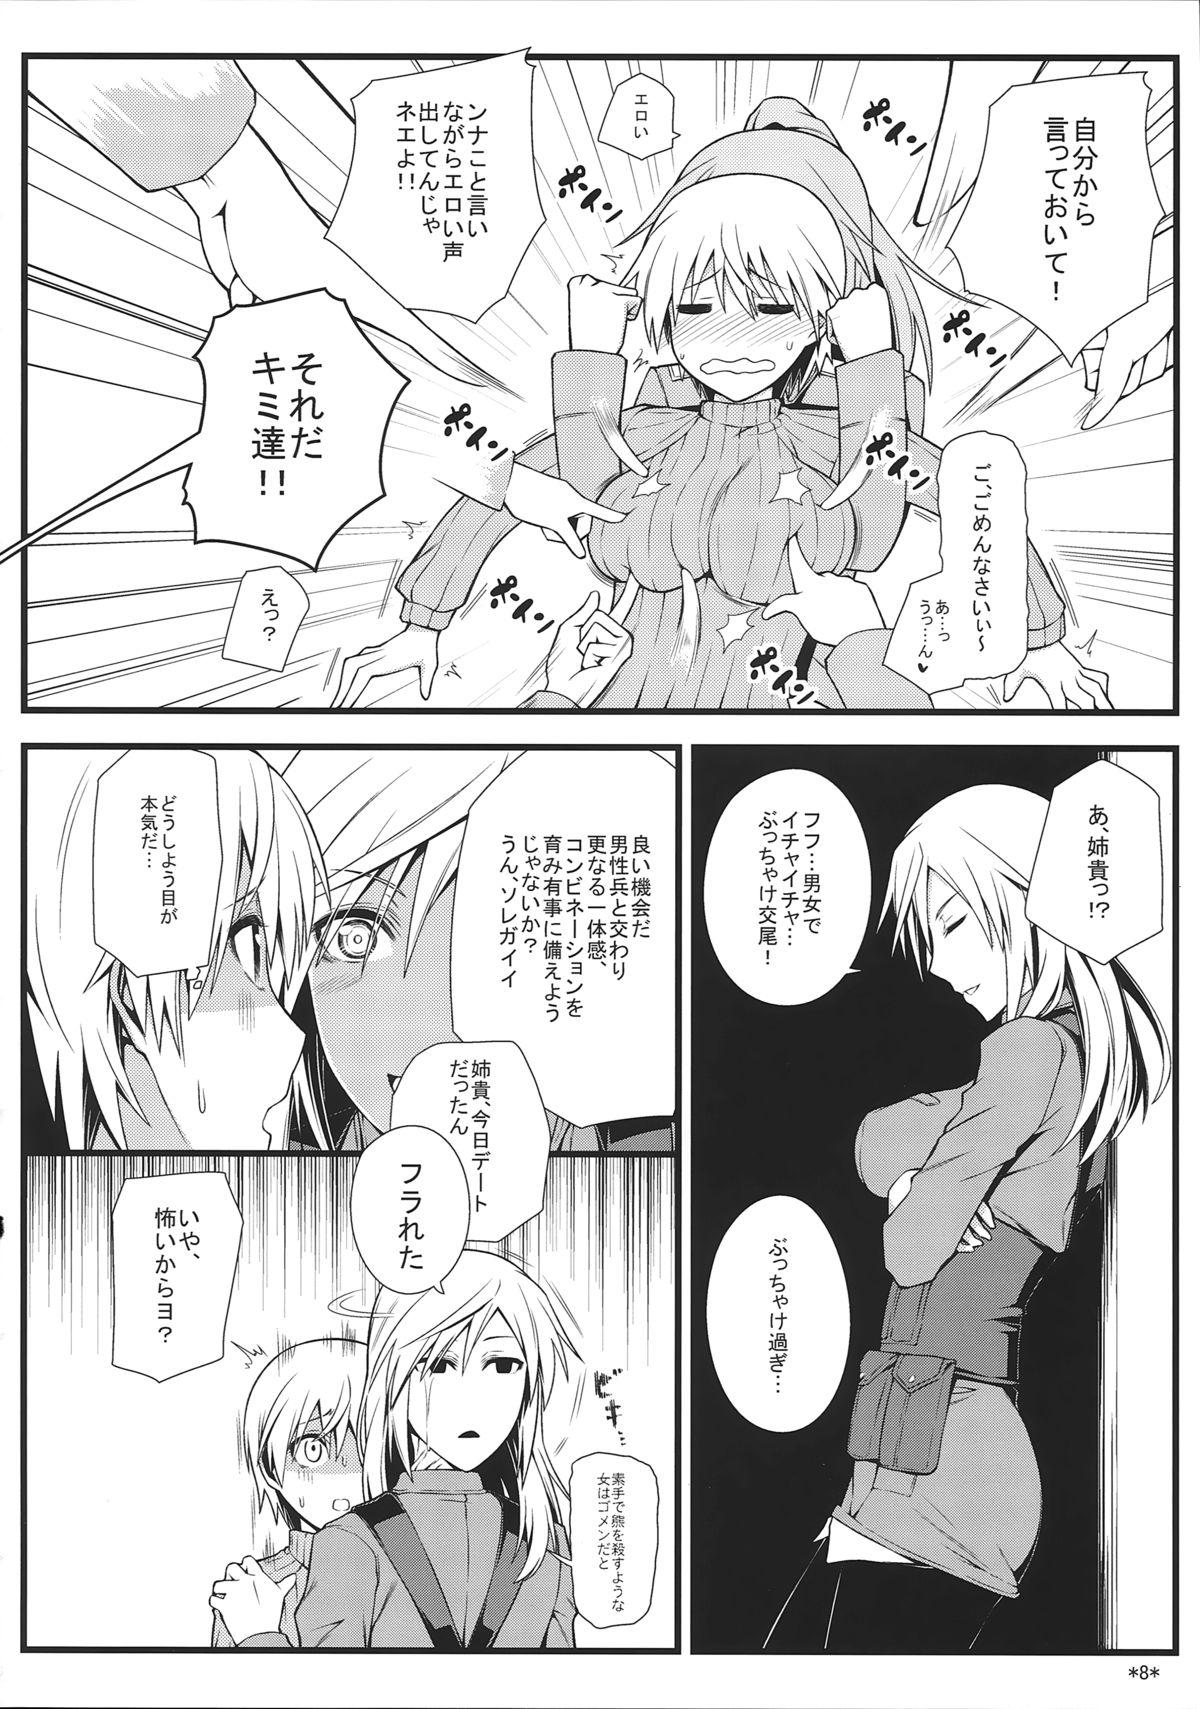 Teamskeet KARLSLAND SYNDROME 3 - Strike witches Calle - Page 10